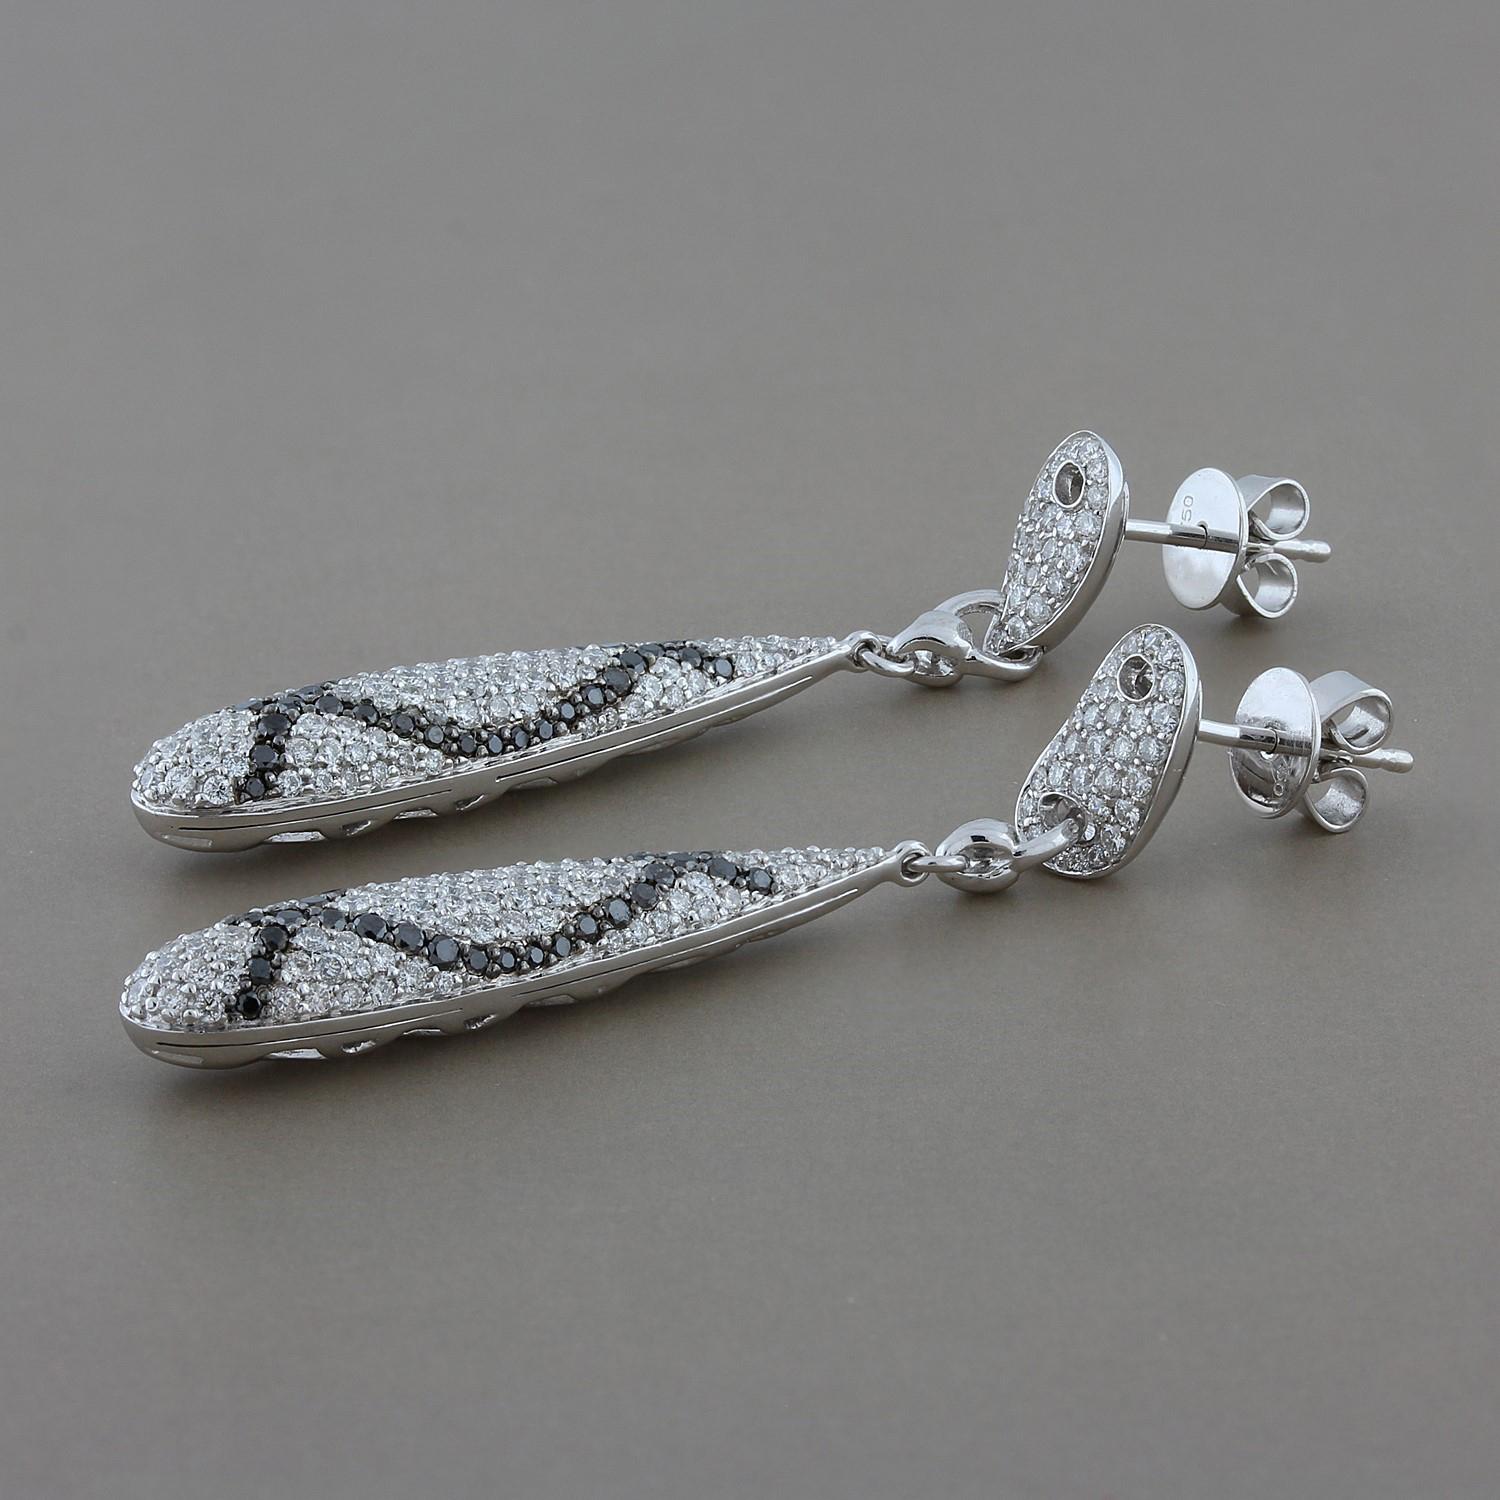 A pair of creative earrings for the night out. These elongated pear shape drop earrings feature 2.67 carats of round brilliant cut diamonds set in 18K white gold. 

Earring Length: 1.95 inches
Earring Width: 0.25 inches